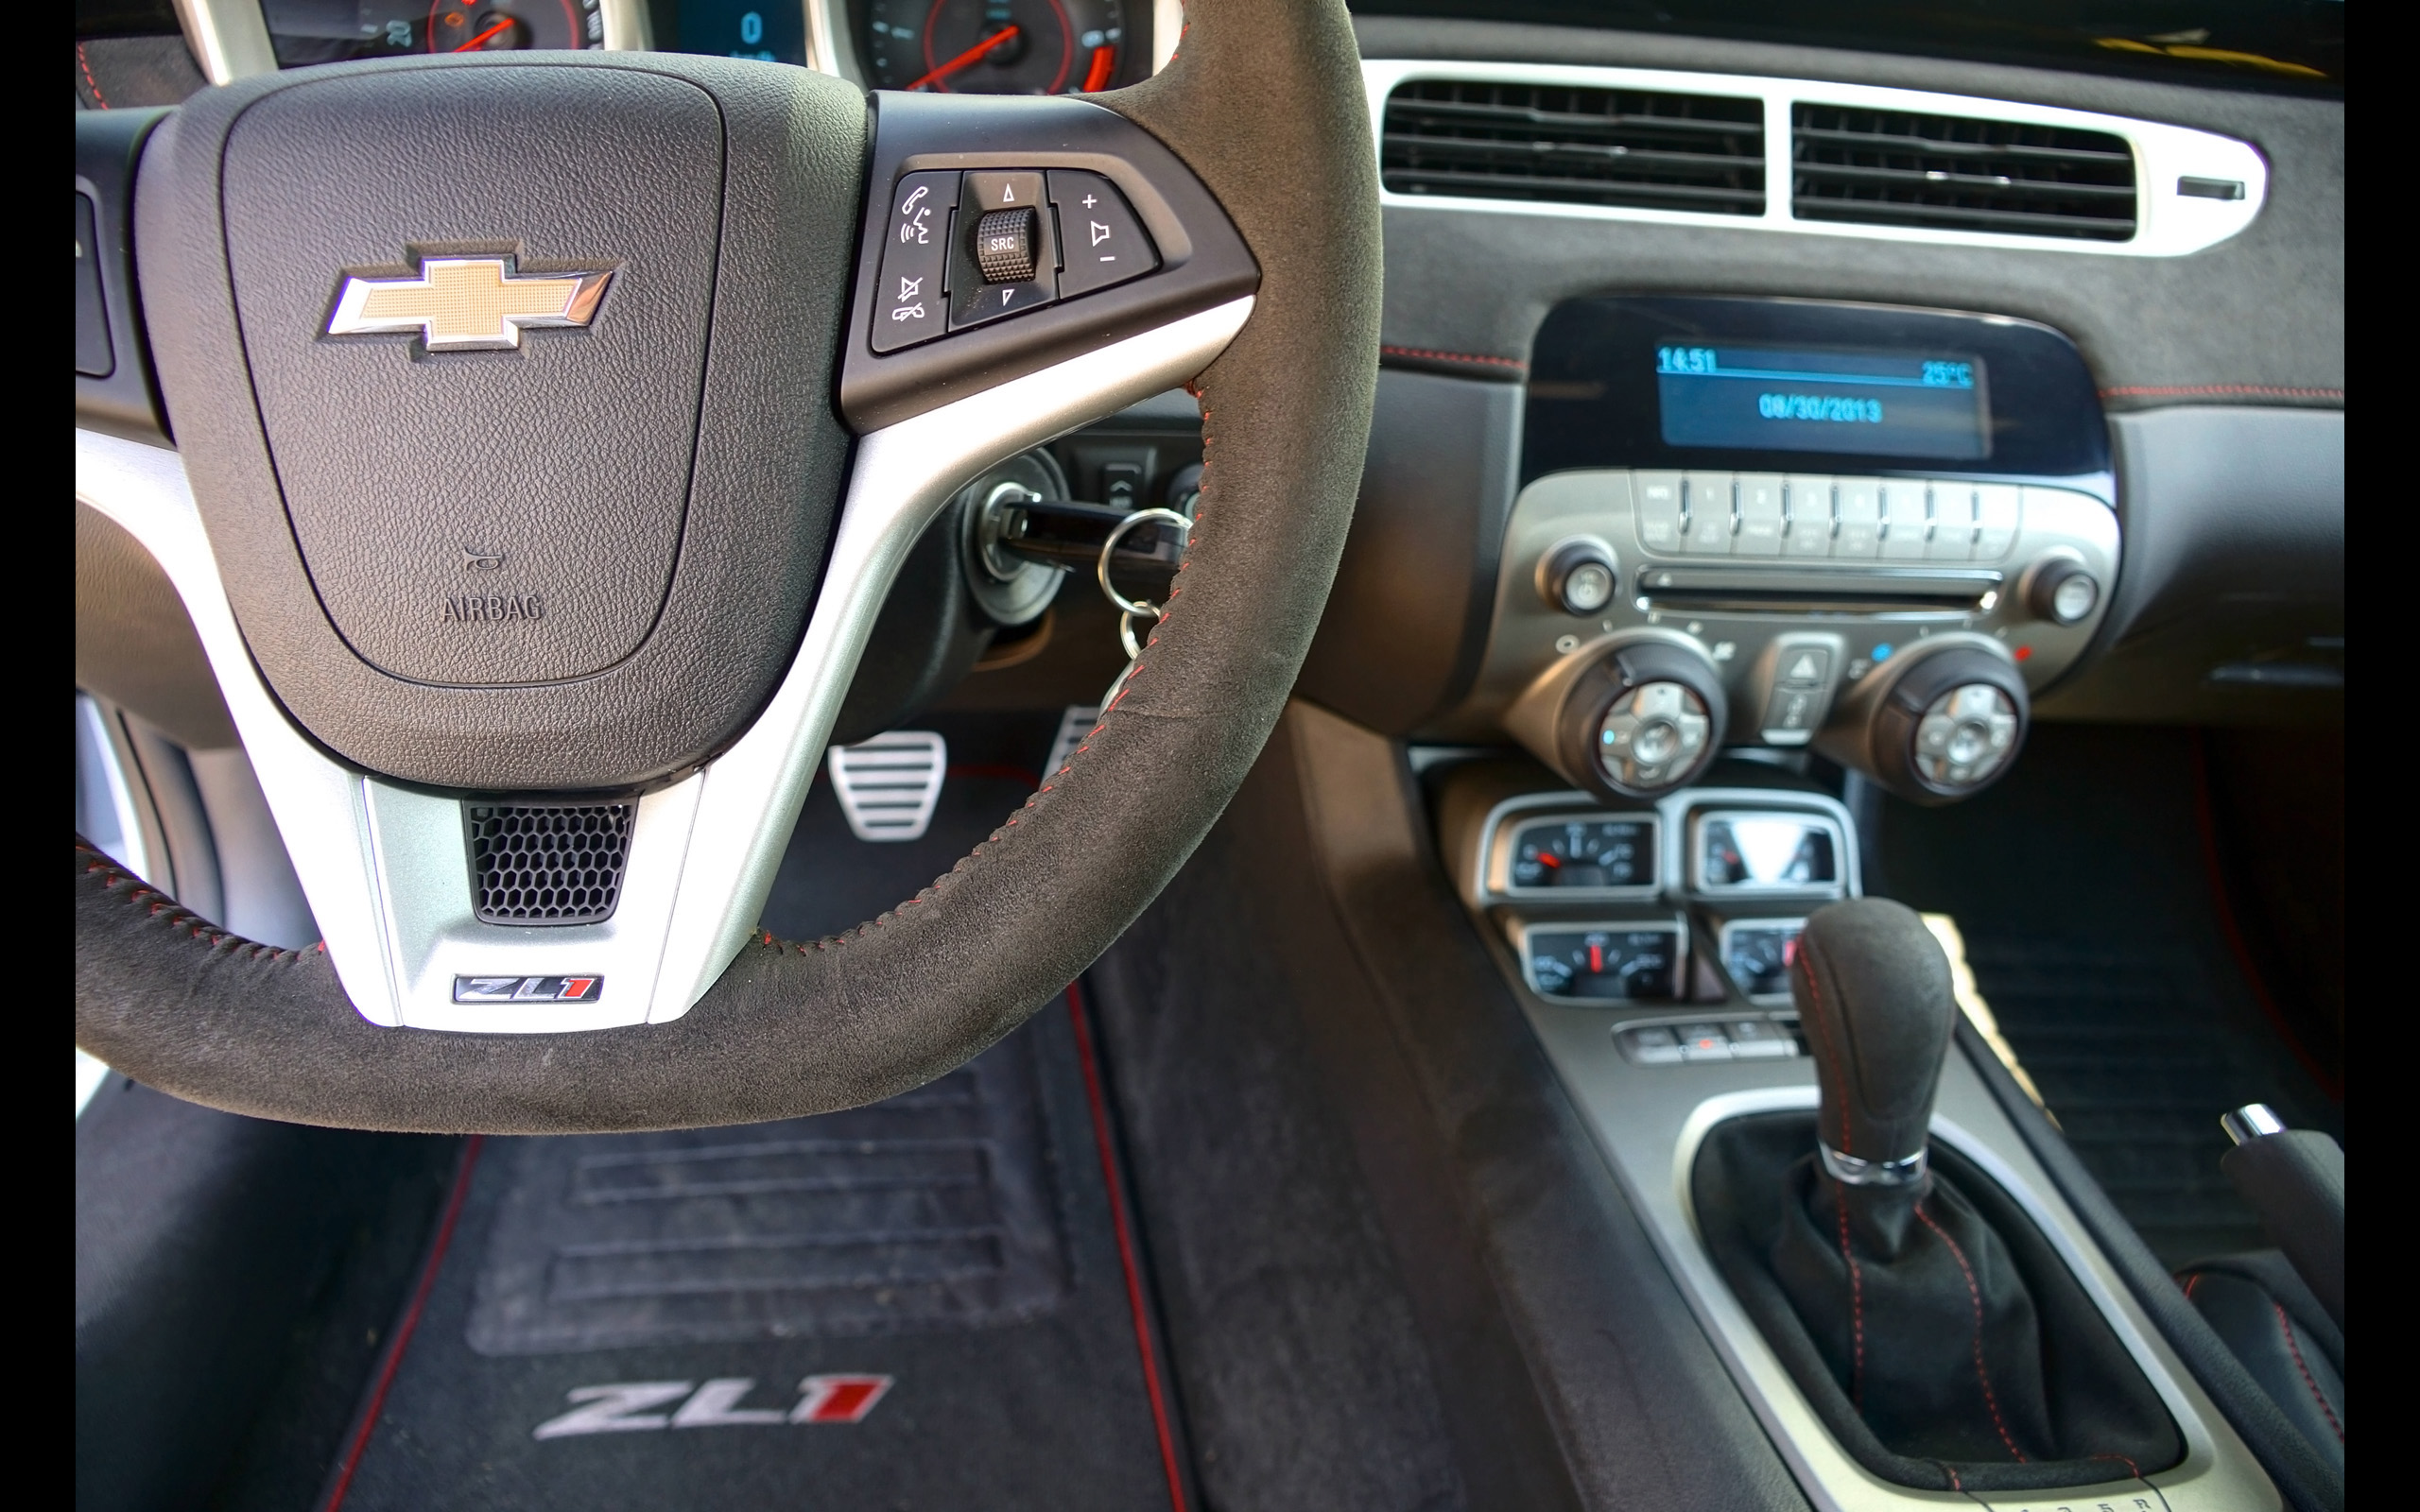 2013, Geigercars, Chevrolet, Camaro, Ls9, Muscle, Tuning, Interior Wallpaper